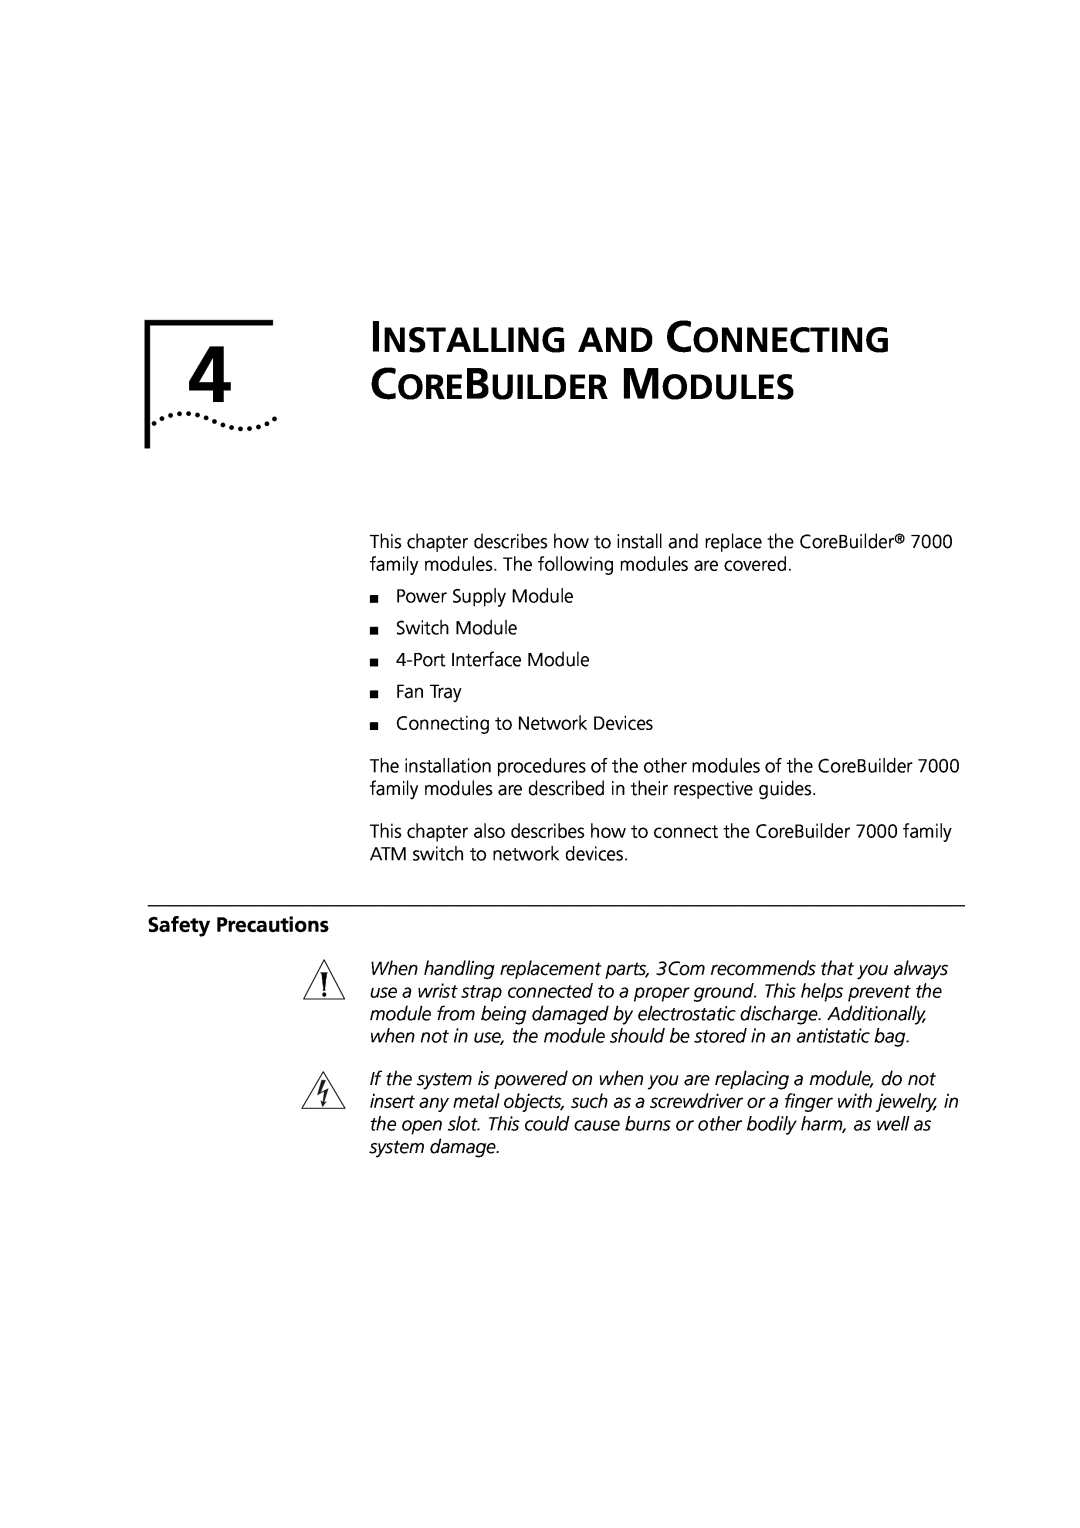 3Com 7000 manual Core Builder Modules, Installing And Connecting, Safety Precautions 